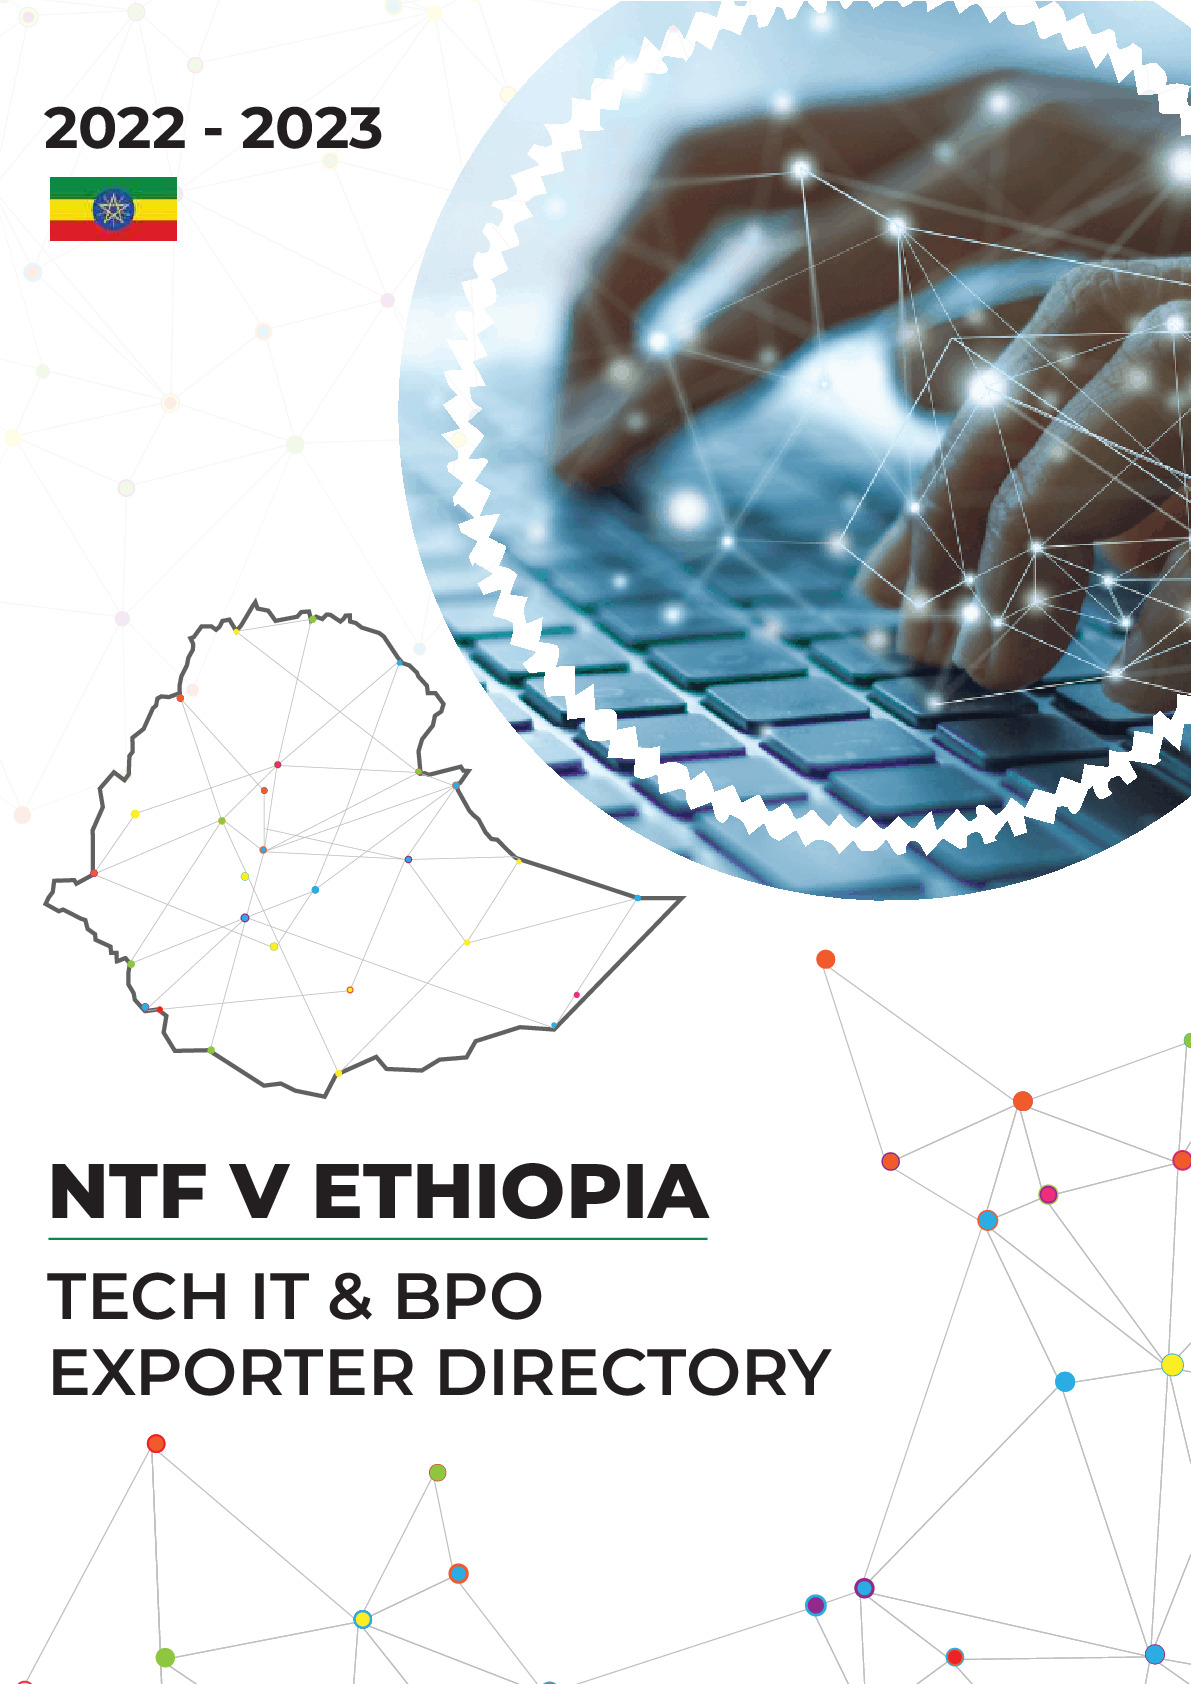 ntf_v_ethiopia_2022_-_2023_tech_it_and_bpo_exporter_directory